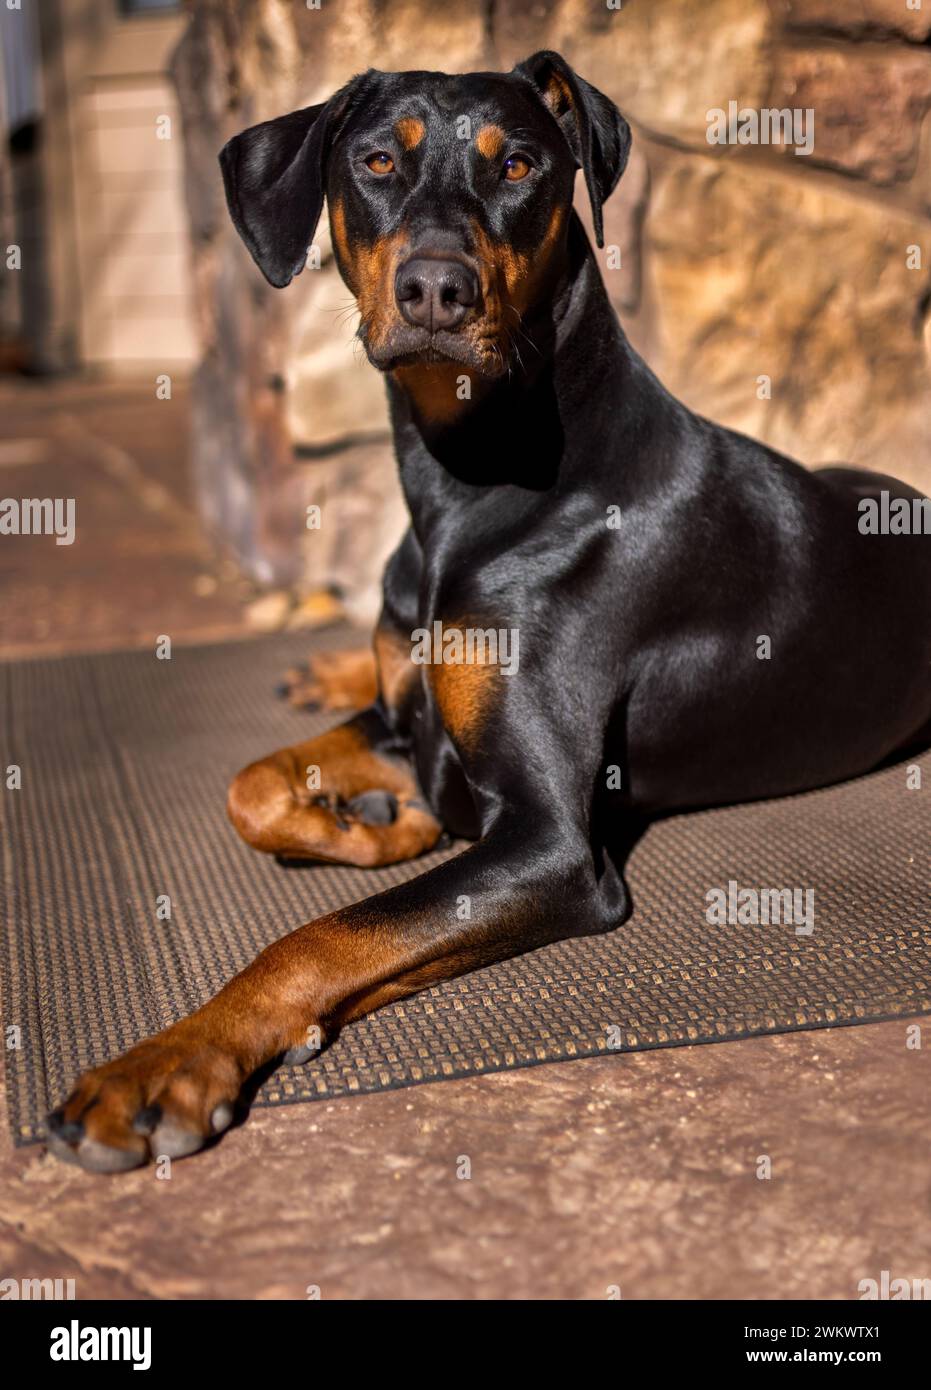 Doberman Pinscher puppy, 1 year old, laying in the sun on a patio carpet Stock Photo